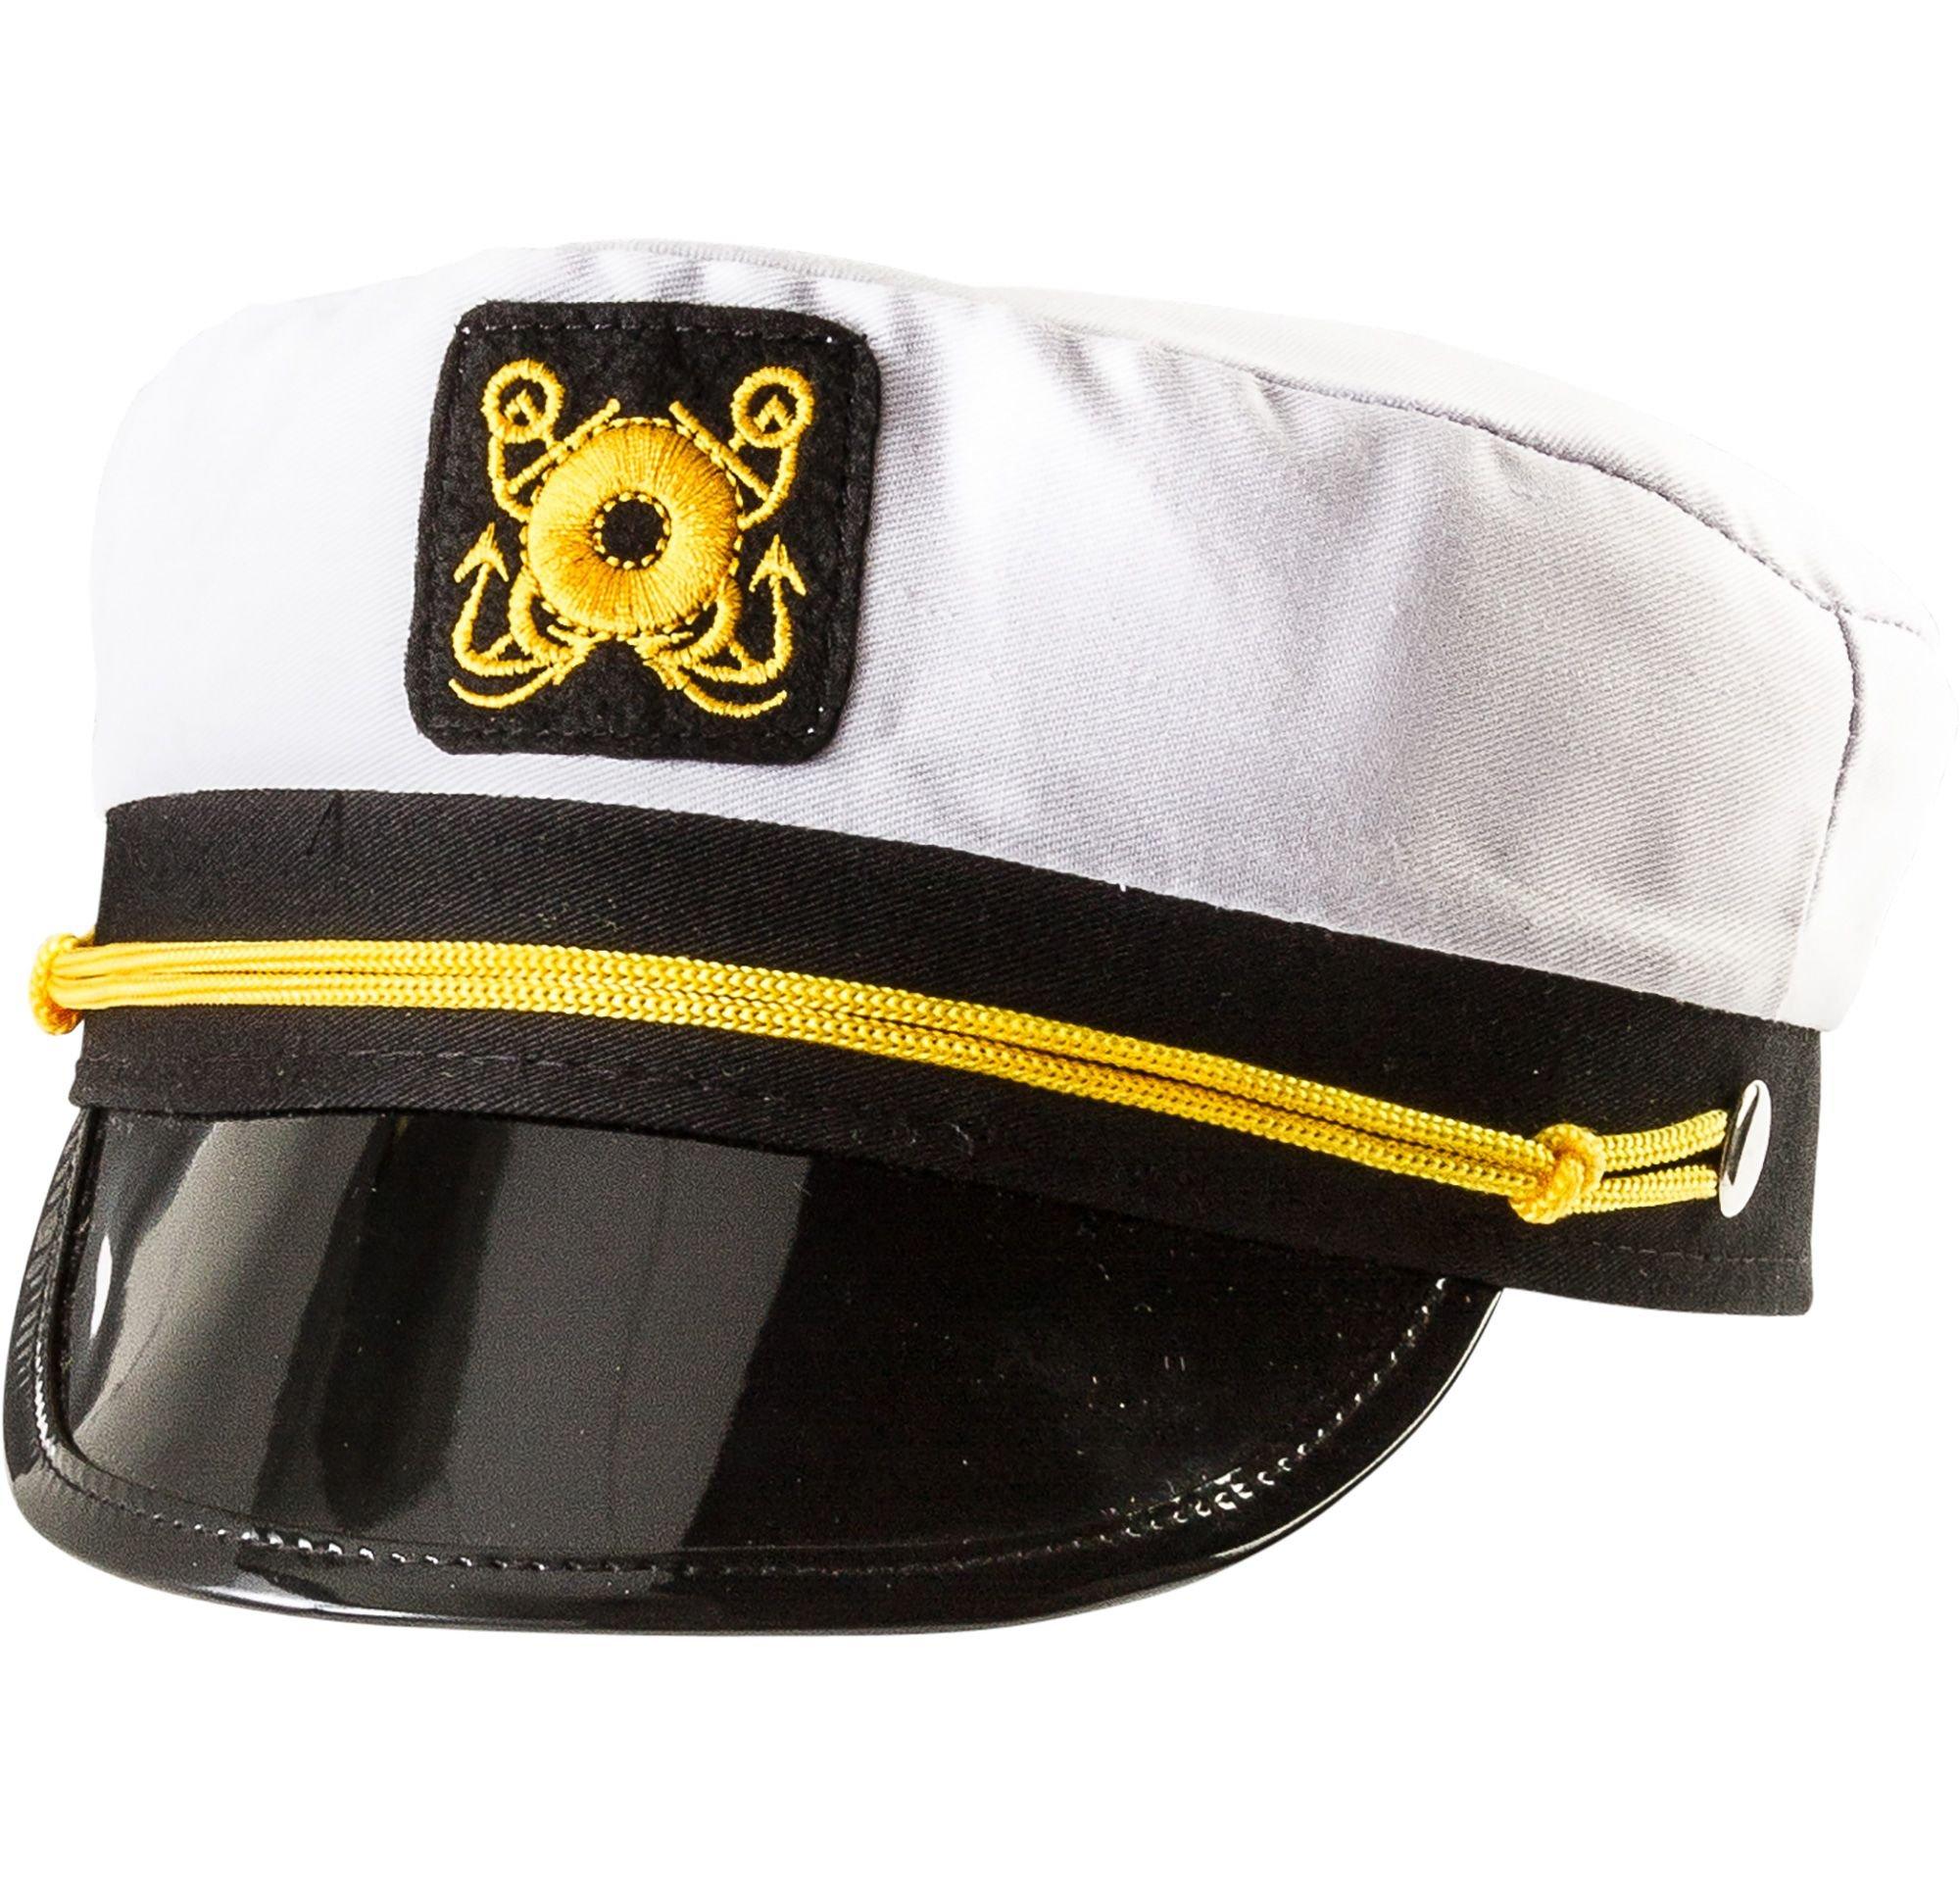 Sailor Ship Yacht Boat Captain Hat Navy Marines Admiral Cap Hat White Gold